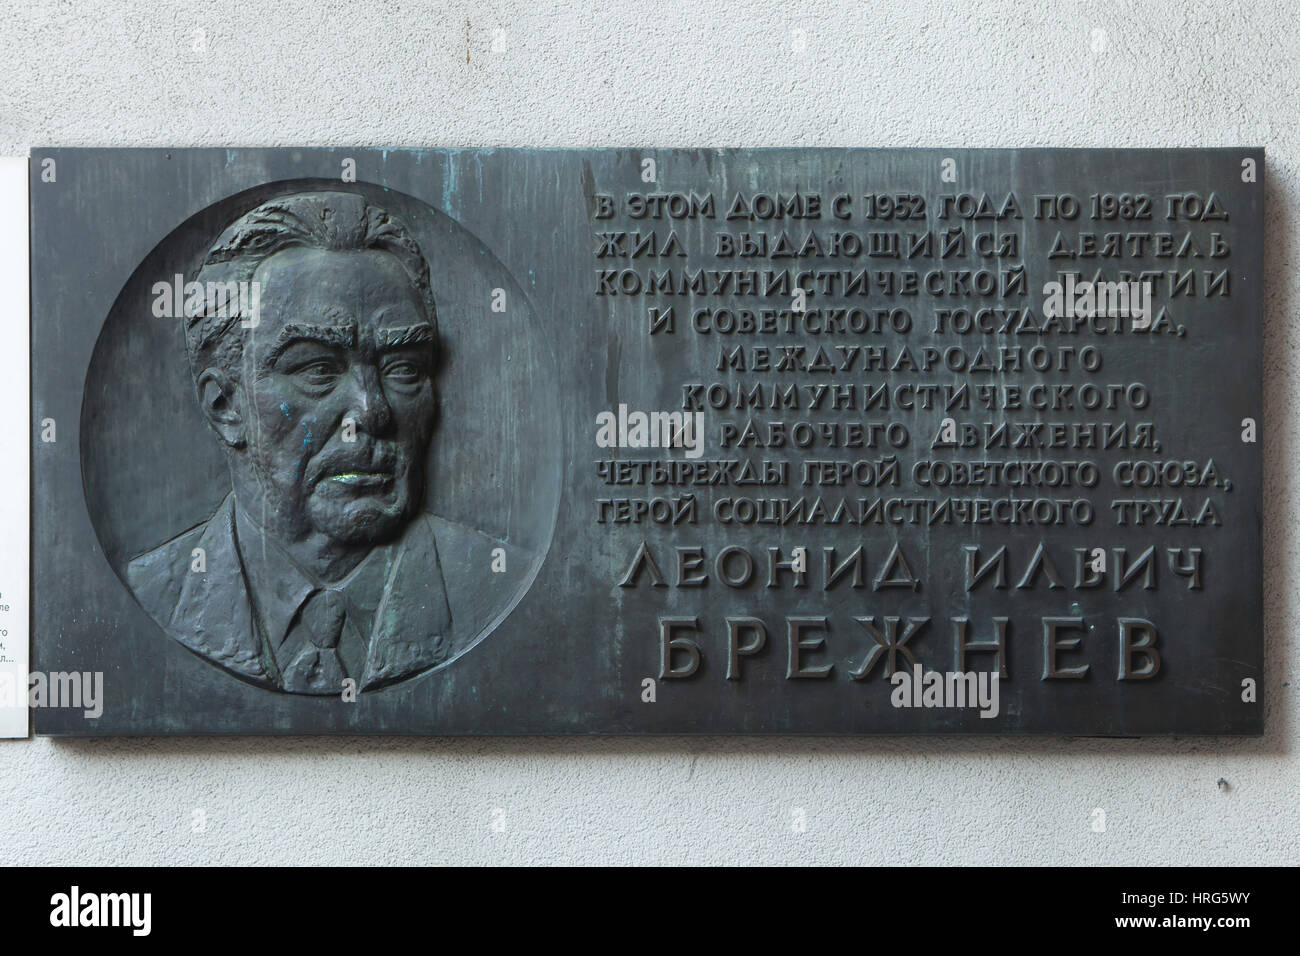 Commemorative plaque to Soviet leader Leonid Brezhnev displayed next to the entrance to the Mauermuseum (Berlin Wall Museum) in Berlin, Germany. The plaque designed by Soviet sculptor Yulian Rukavishnikov (1982) once was installed on the house in Kutuzovsky Avenue in Moscow, Russia, where Leonid Brezhnev lived from 1952 to 1982. After the collapse of the Communist regime in the USSR, the plaque was presented to the Mauermuseum. Stock Photo